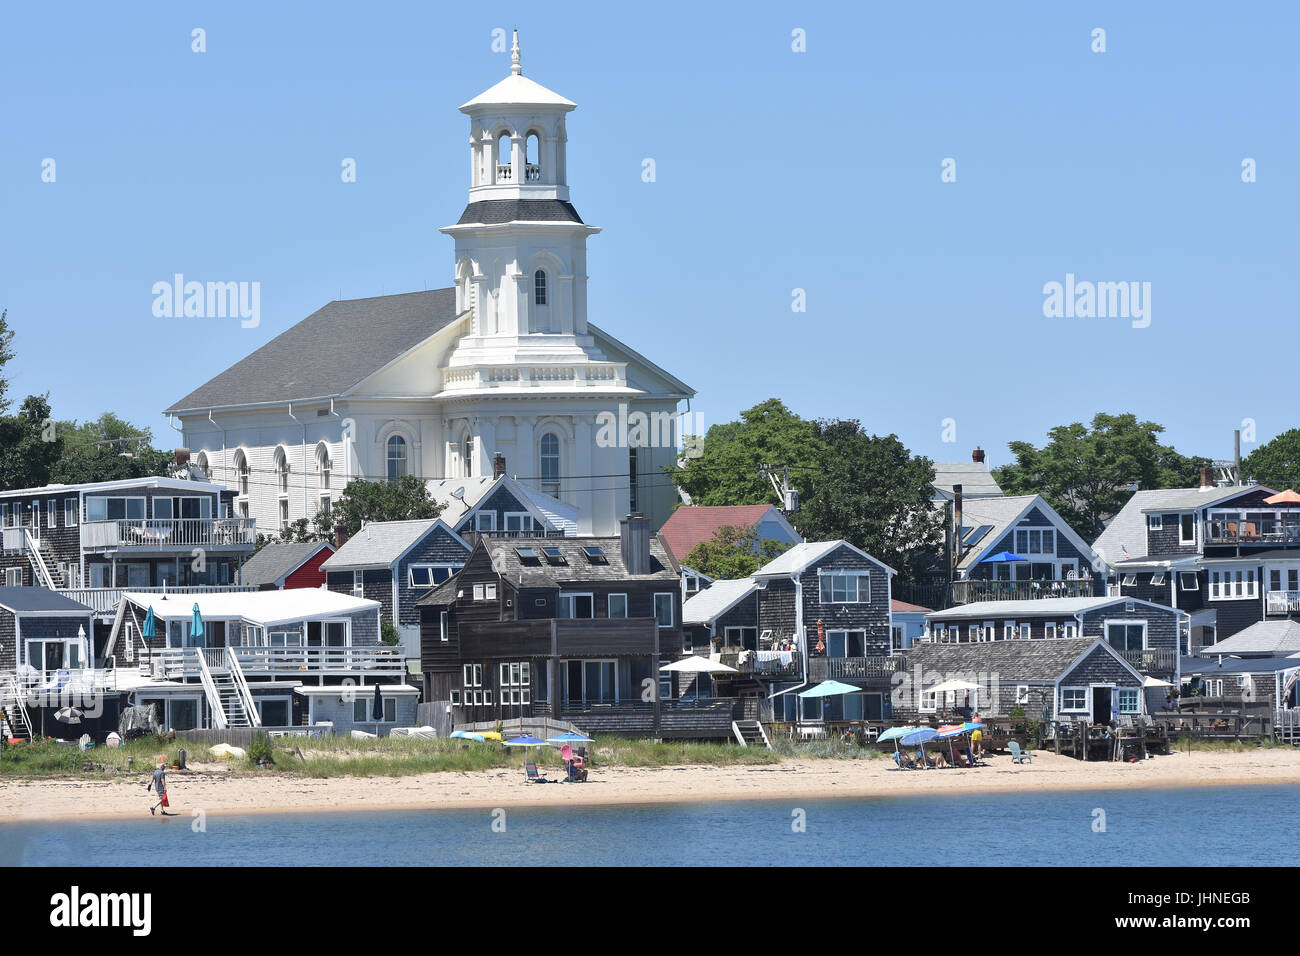 The waterfront of Provincetown, Massachusetts on Cape Cod Stock Photo